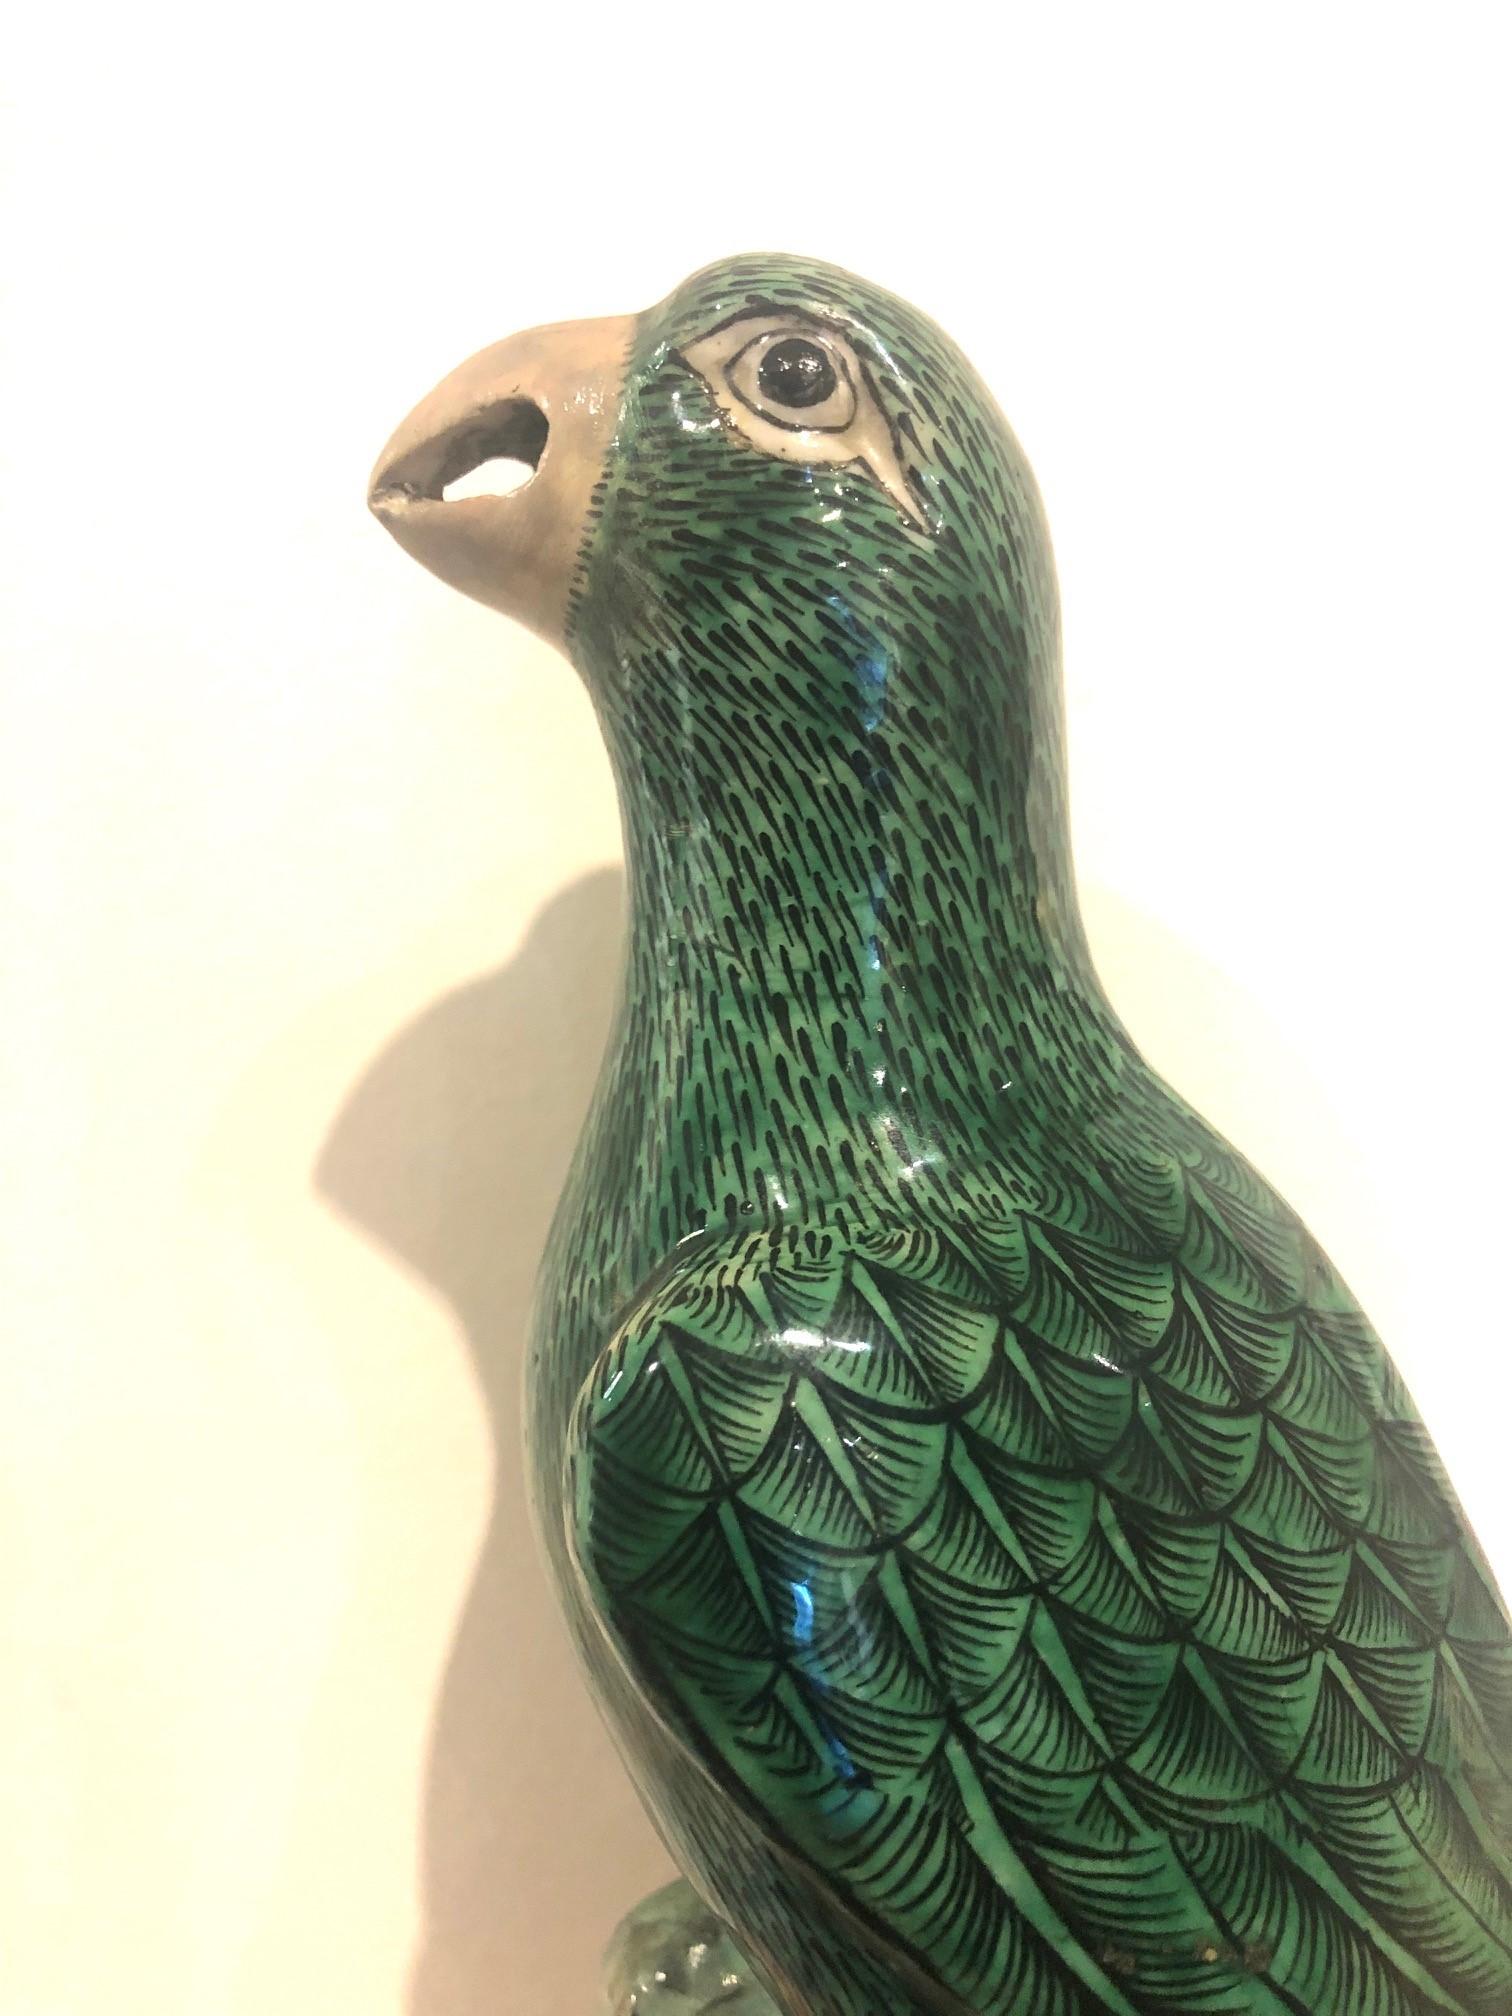 The birds facing inwards, each glazed green with Fine black linear designs portraying the feathers terminating in grey beak and feet, perched upon a ridged and pierced base in conforming colors.

Published Sotheby's Melbourne 2010.